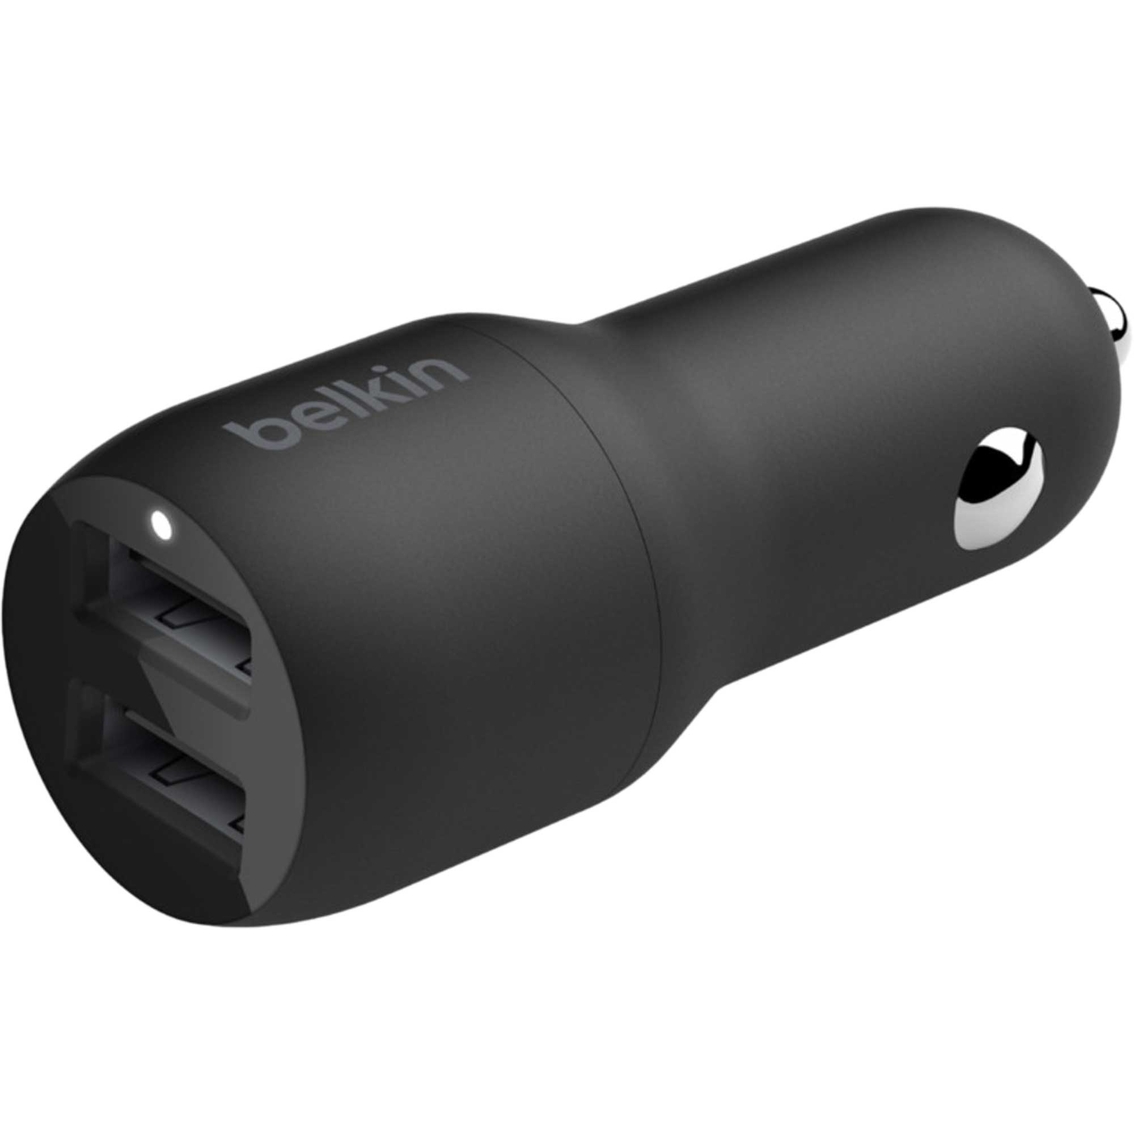 Belkin Boost Charge Dual USB-A Car Charger 24W + USB-A to USB-C Cable - Image 3 of 3